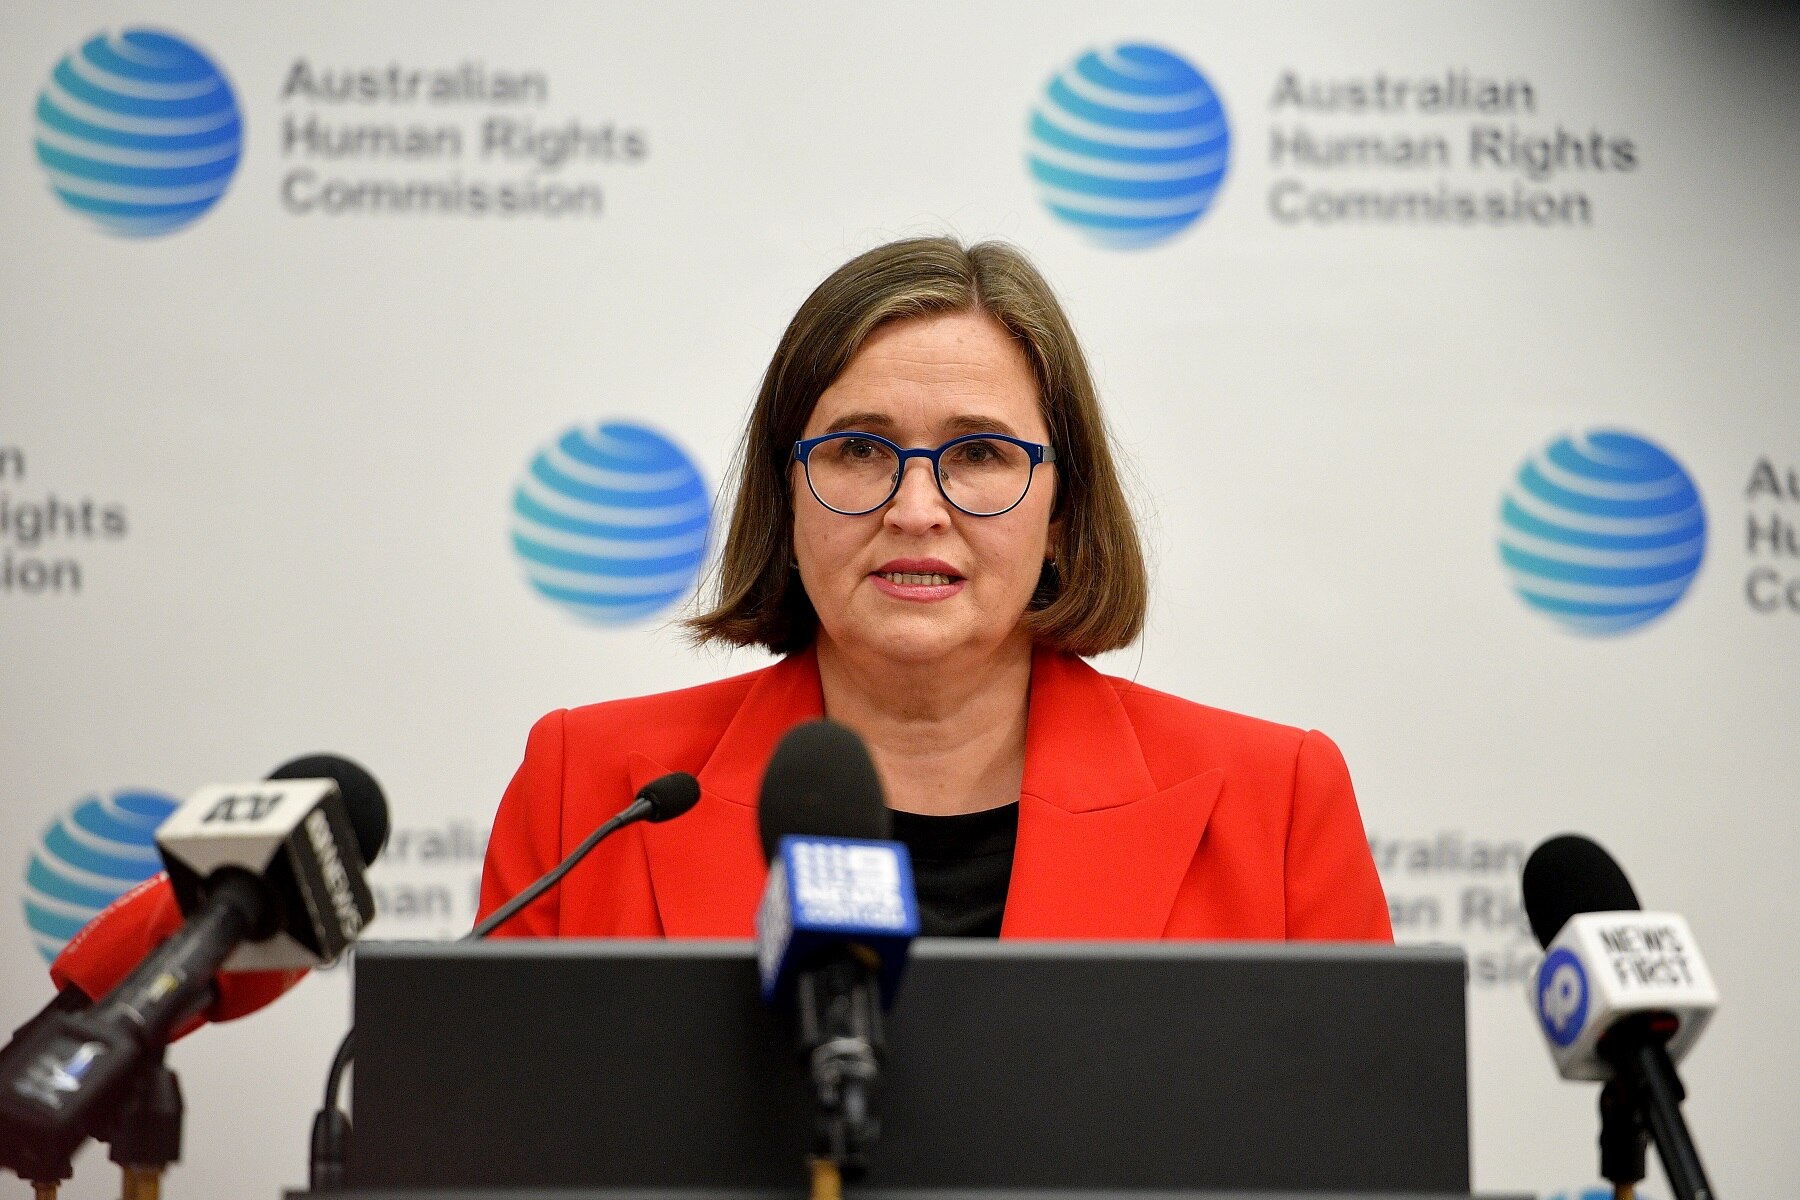 Sex Discrimination Commissioner Kate Jenkins at the launch of the report